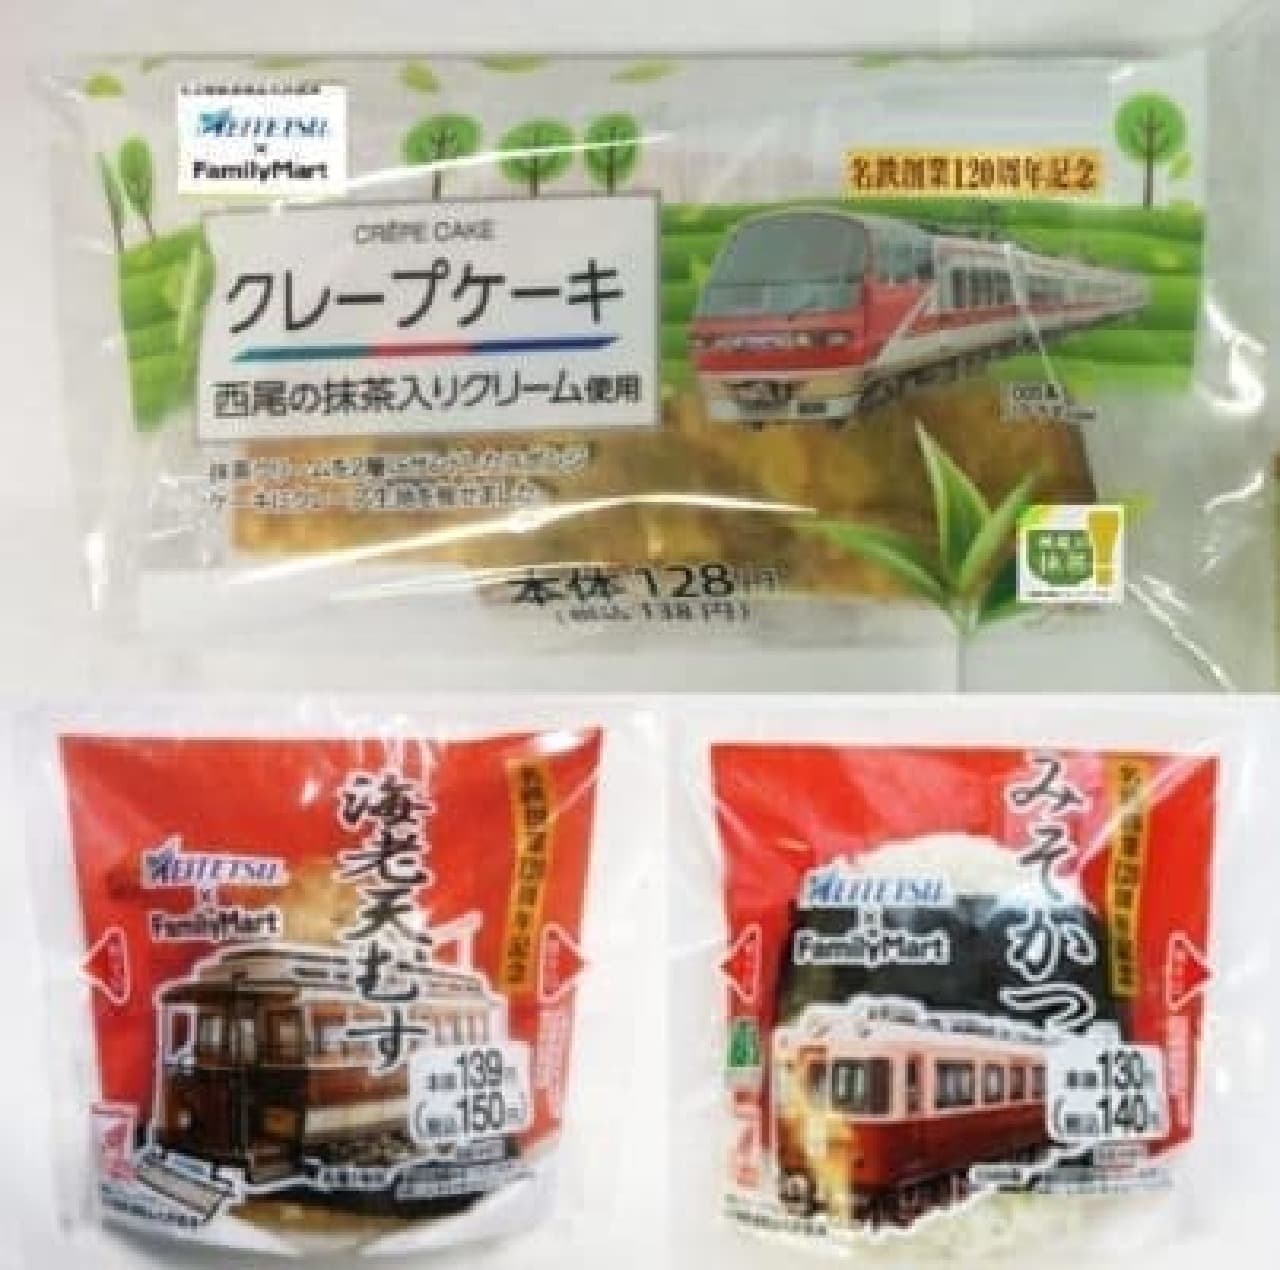 Tie-up products are now available at FamilyMart